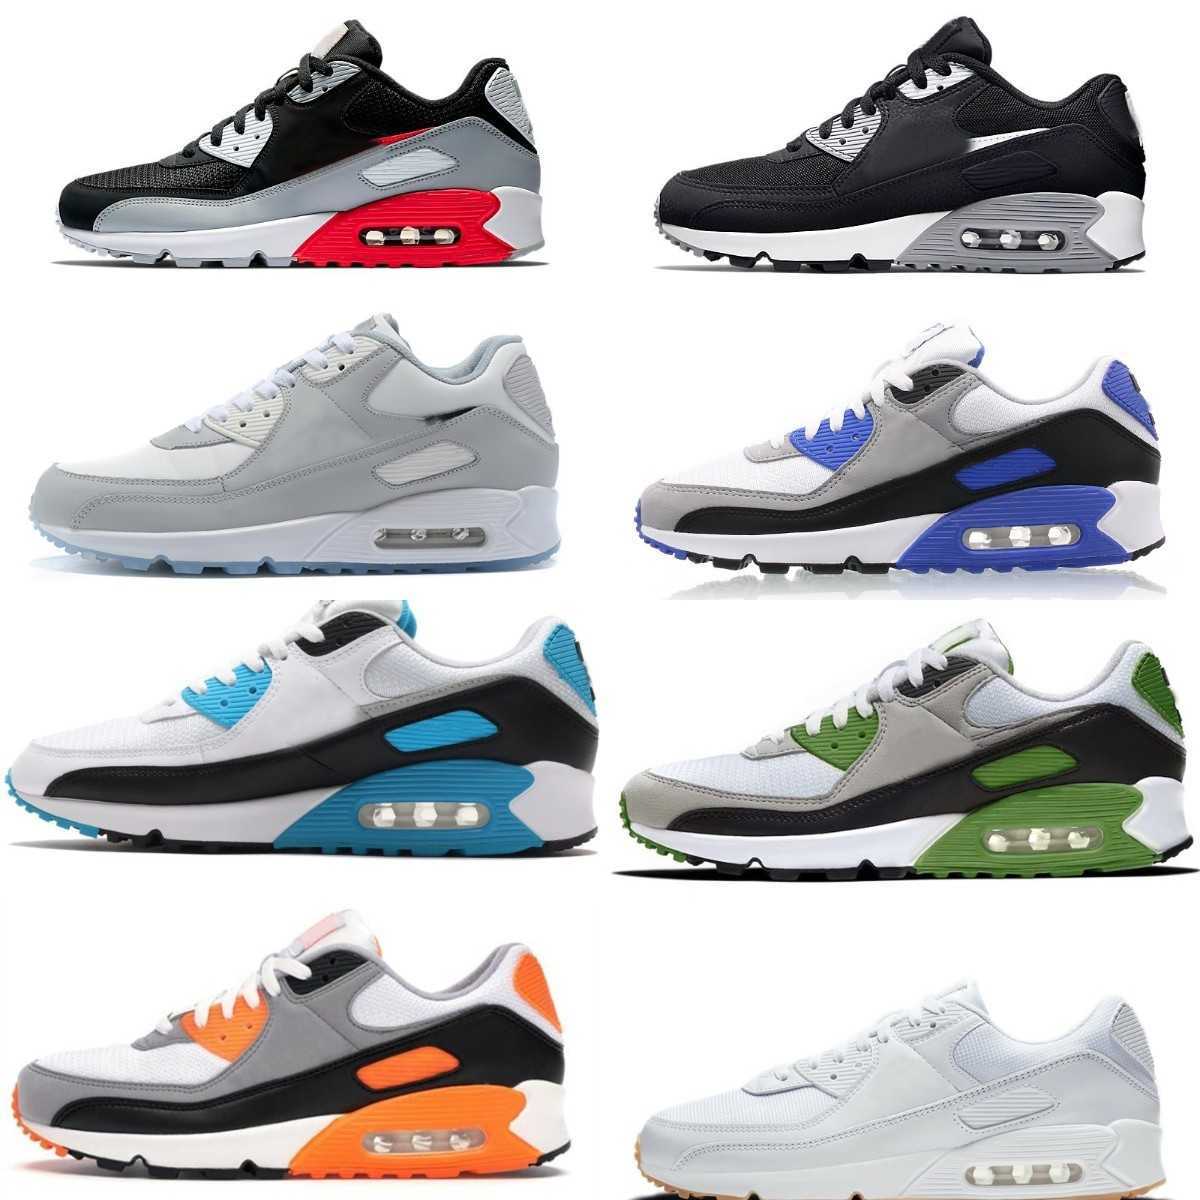 

Designer Men 90 Running Sports Shoes Triple White Black Red 90s Wolf Grey Polka Dot Infrared Total Orange Laser Blue Airs Hyper Grape Royal Women Trainer Sneakers S65, Please contact us